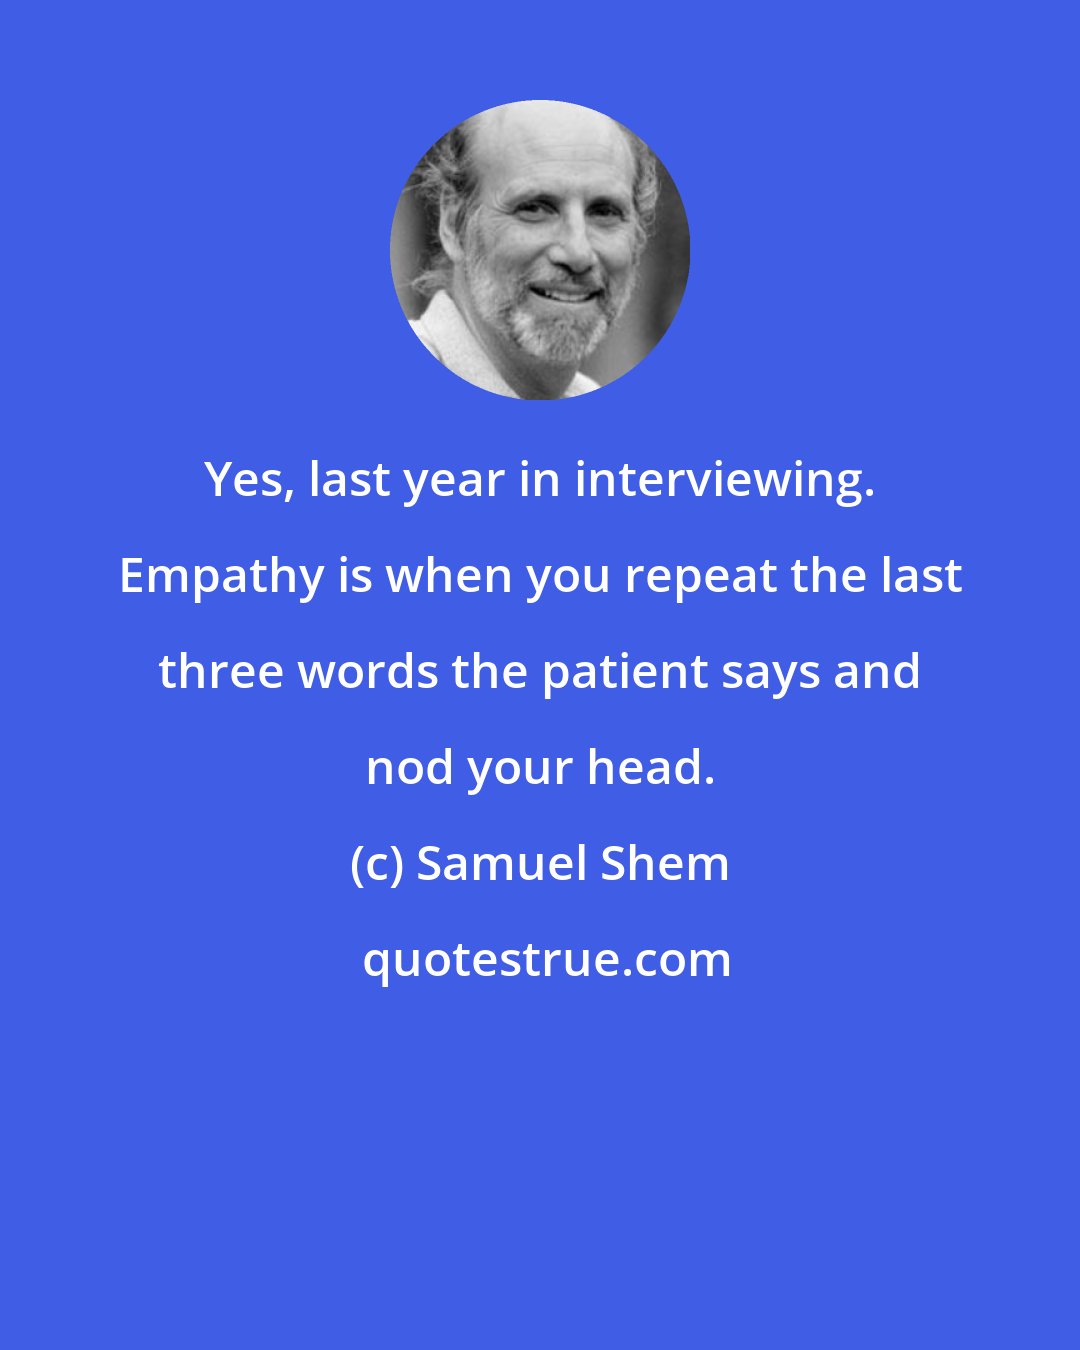 Samuel Shem: Yes, last year in interviewing. Empathy is when you repeat the last three words the patient says and nod your head.